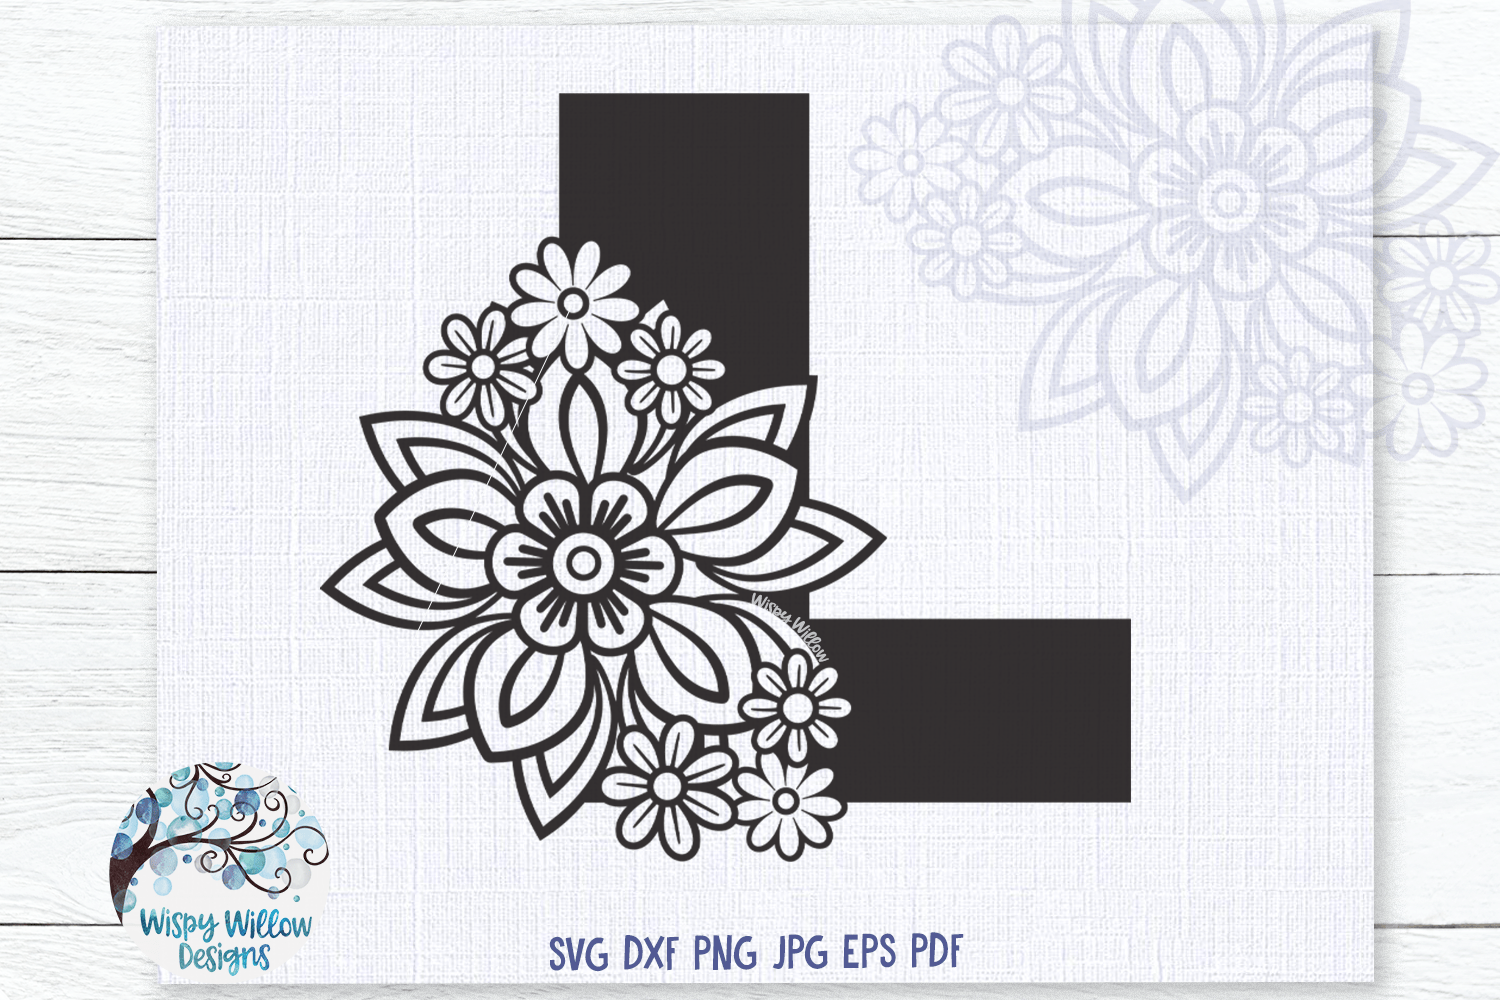 Floral Letter L SVG Wispy Willow Designs Company